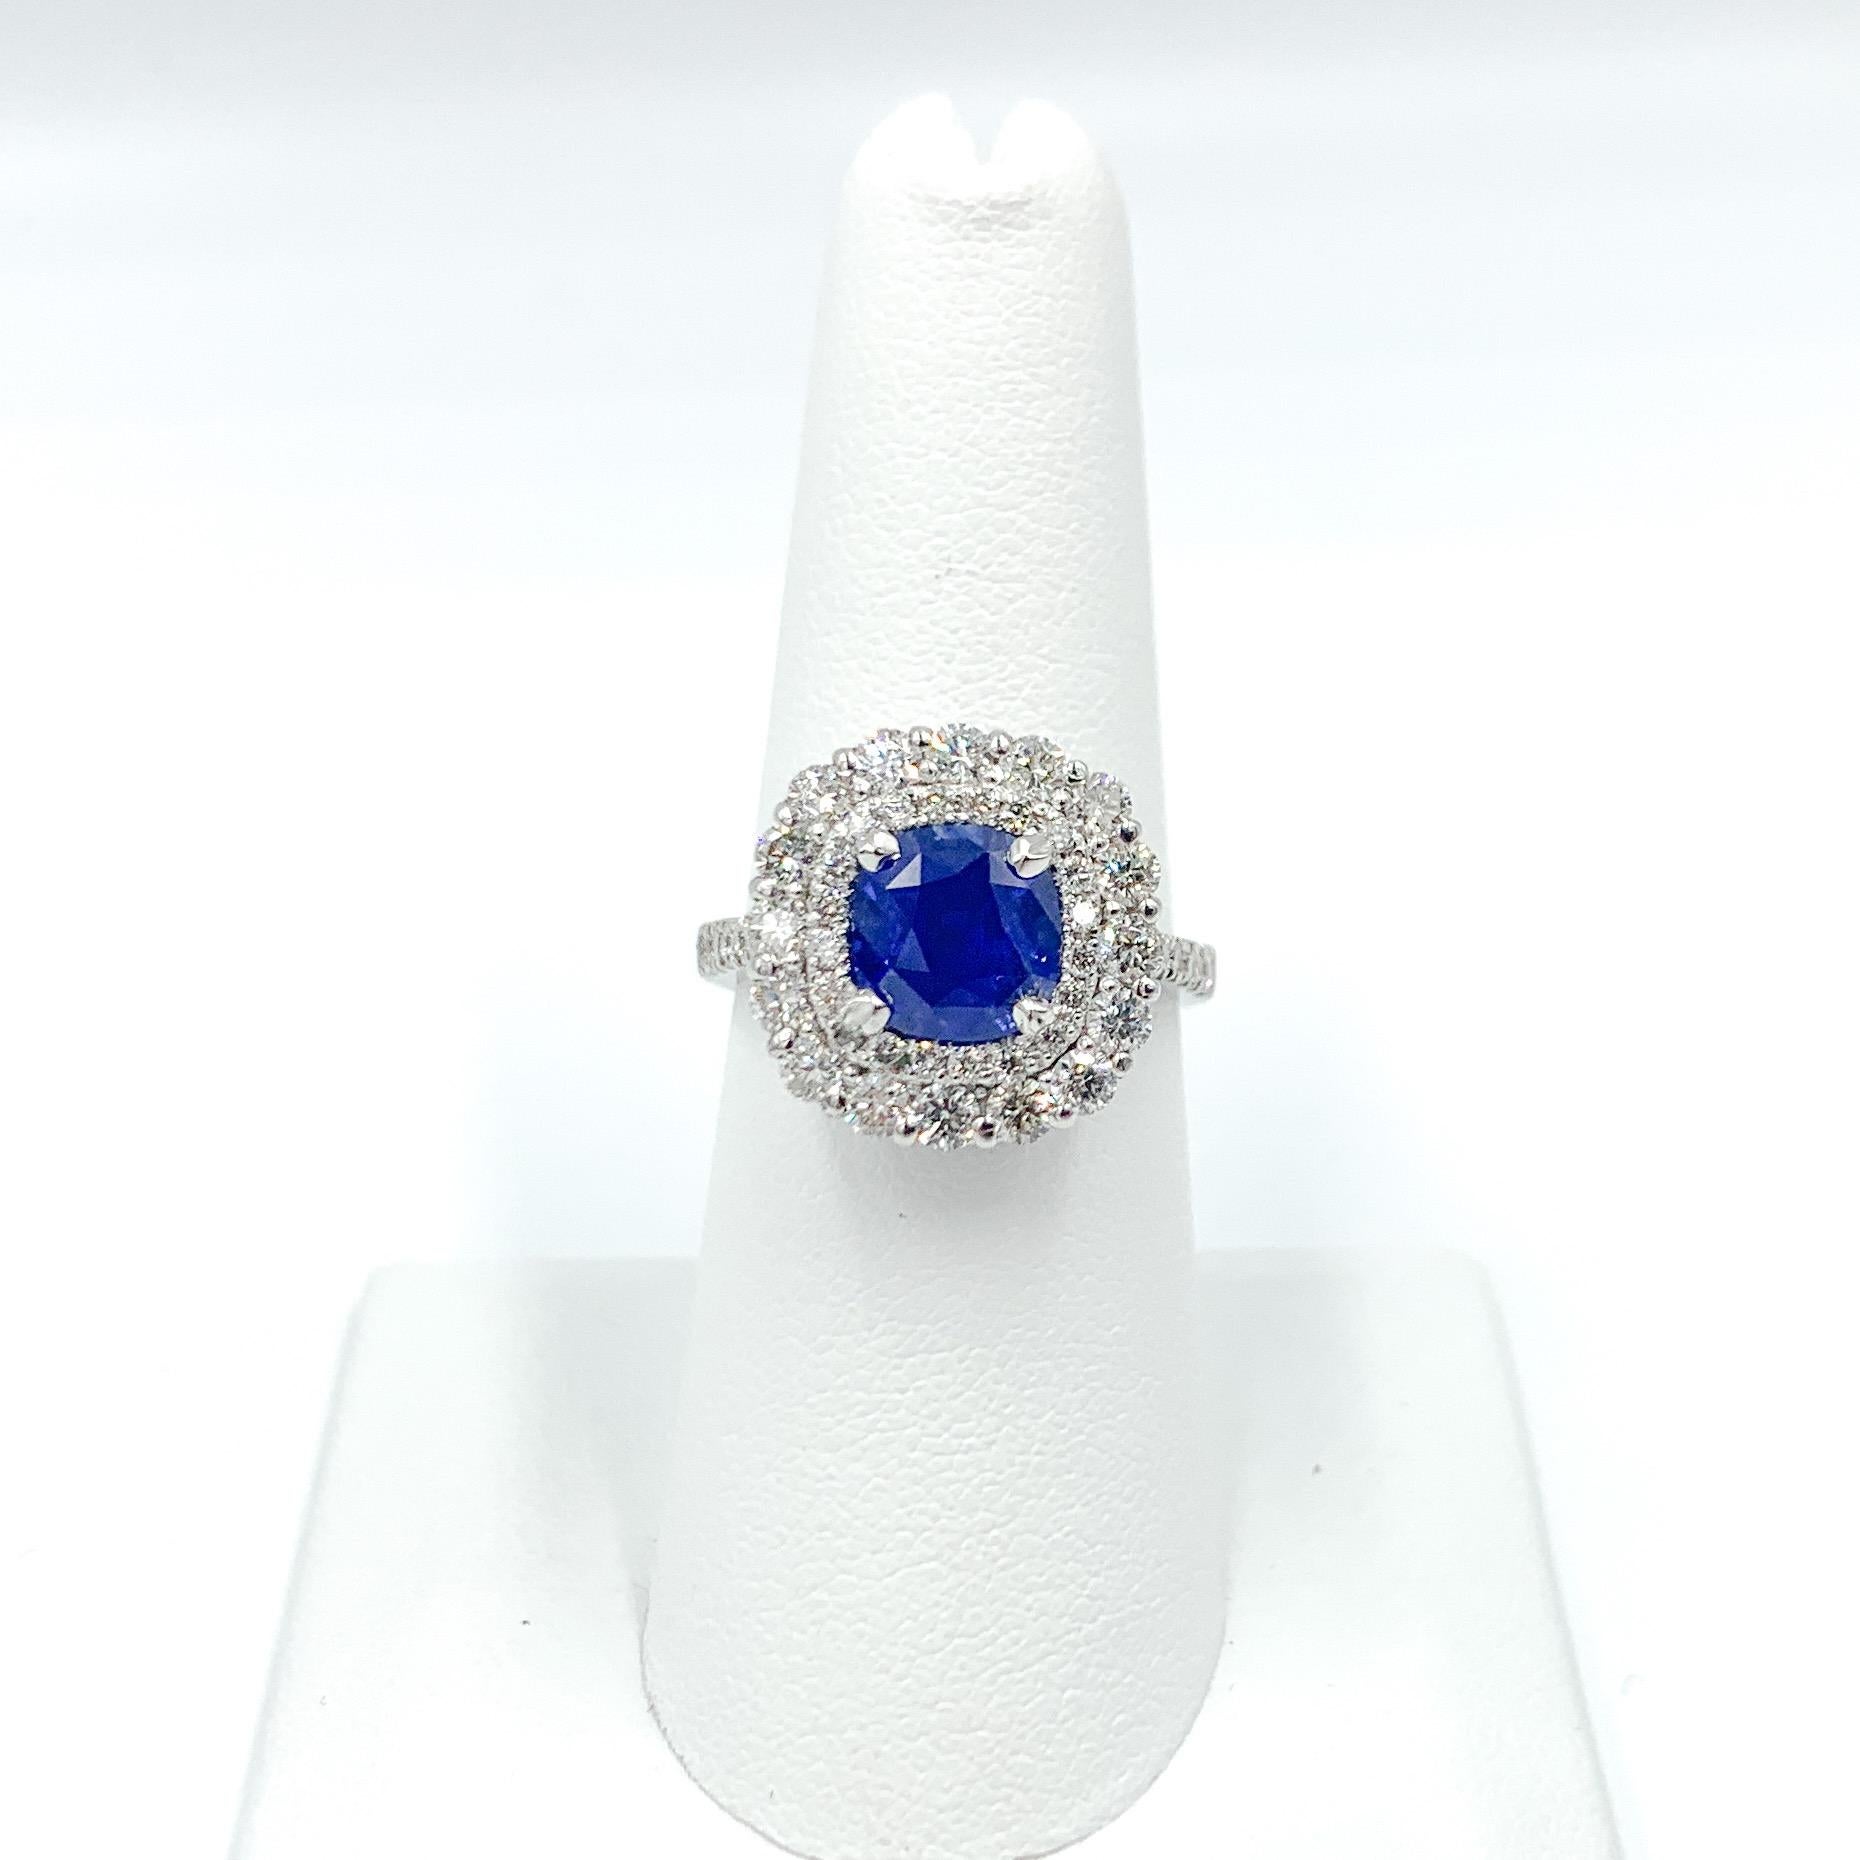 This sapphire is absolutely stunning. It is the famous cornflower blue that the finest quality Kashmir sapphires are known for. The two rows of diamonds highlight just how important this sapphire is. This ring is a head turner! This sale includes